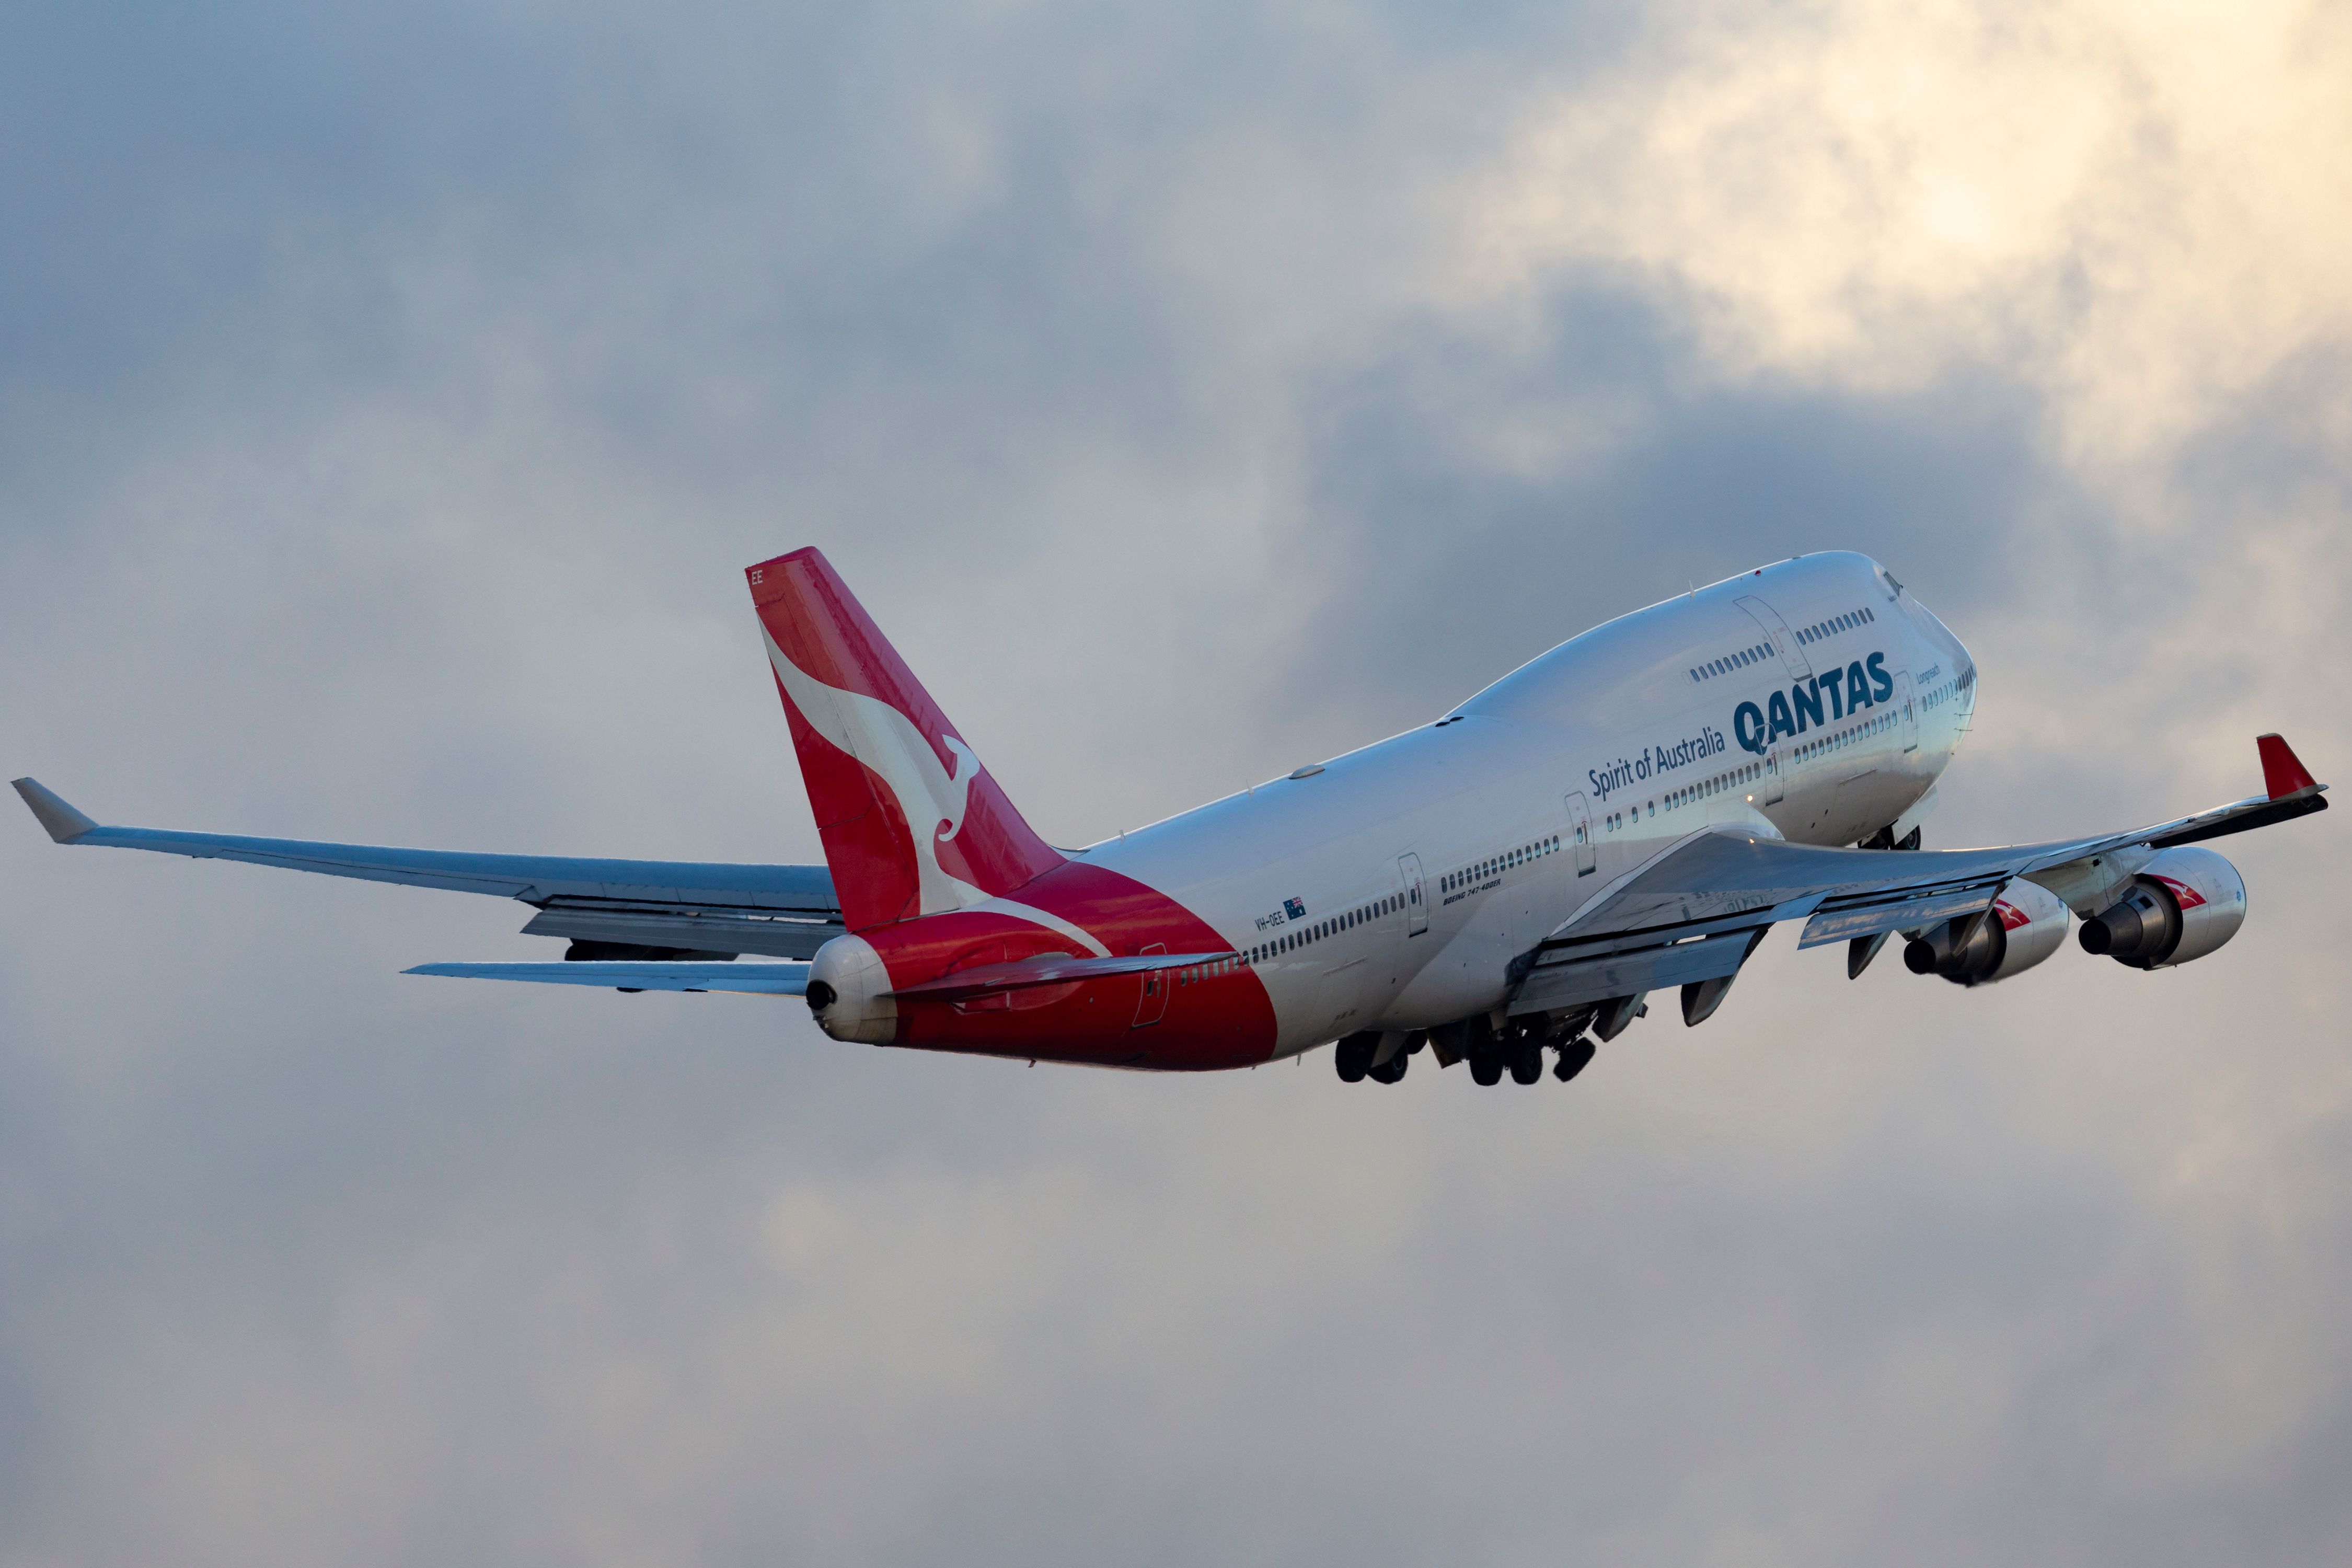 A Qantas Boeing 747-400 flying in the sky.